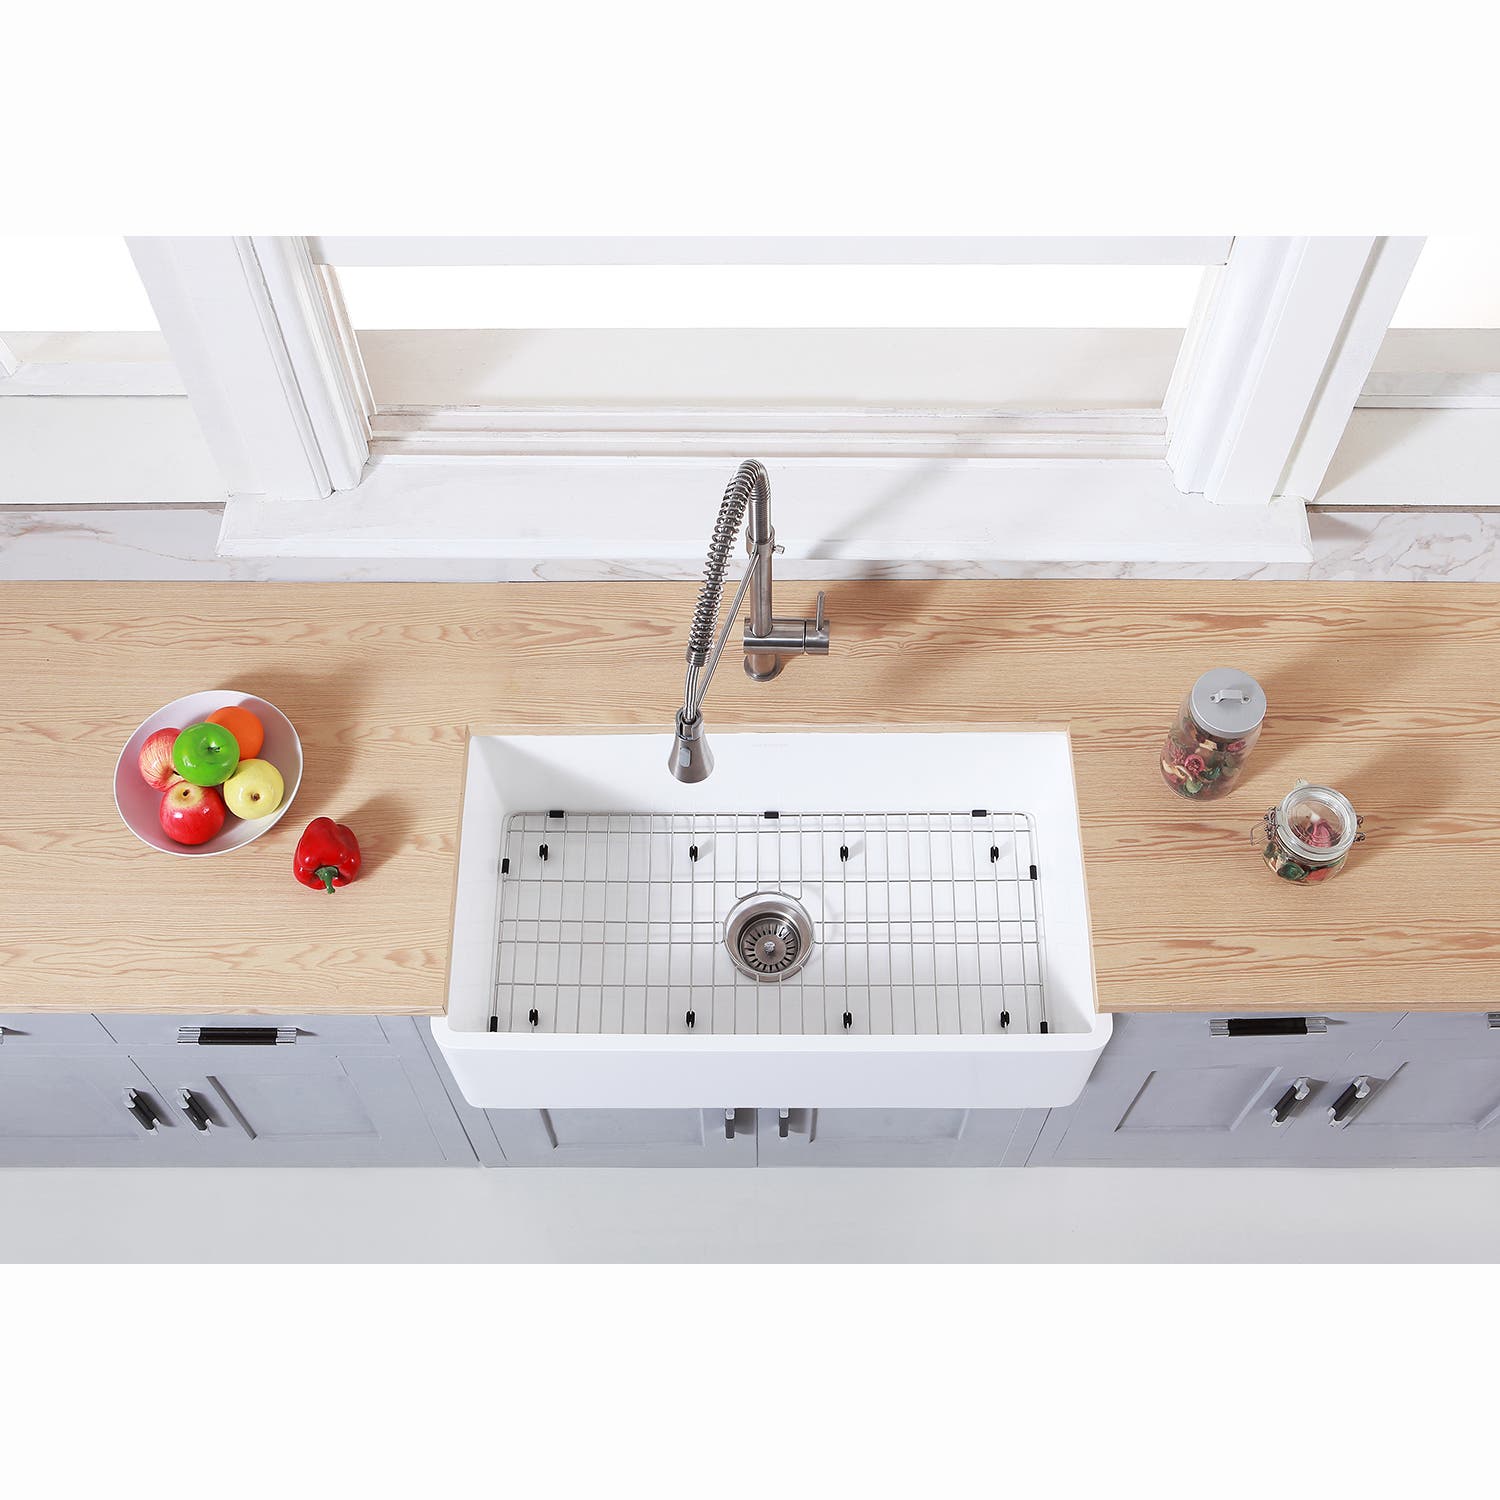 Kingston Brass 36 in. Farmhouse Kitchen Sink with Strainer and Grid, Matte White (KGKFA361810BC)